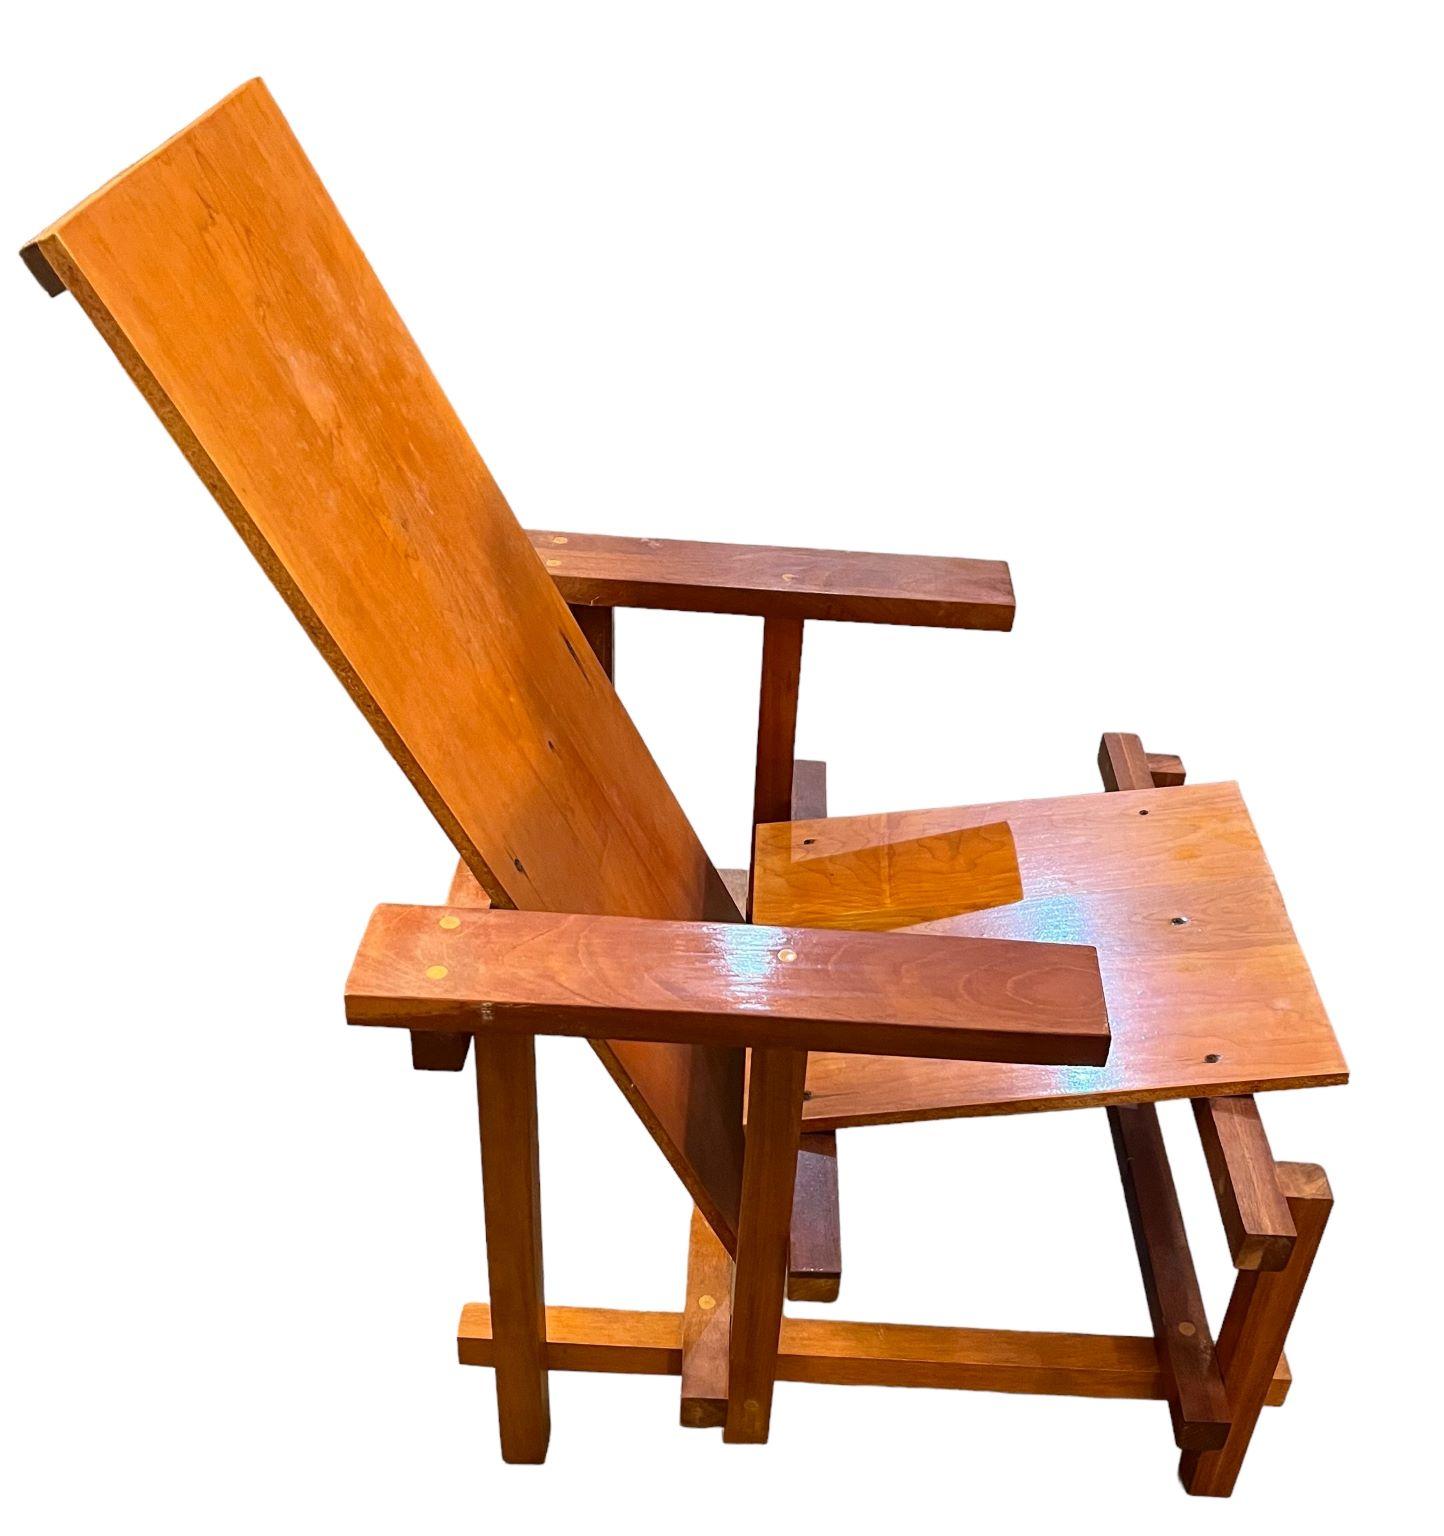 Iconic chair in the style of Dutch artist Gerrit Rietveld. The chair is constructed of maple veneer and solid mahogany. Manufacturer is unknown however all the joints and overall craftsmanship look very professional. In good vintage condition. Some